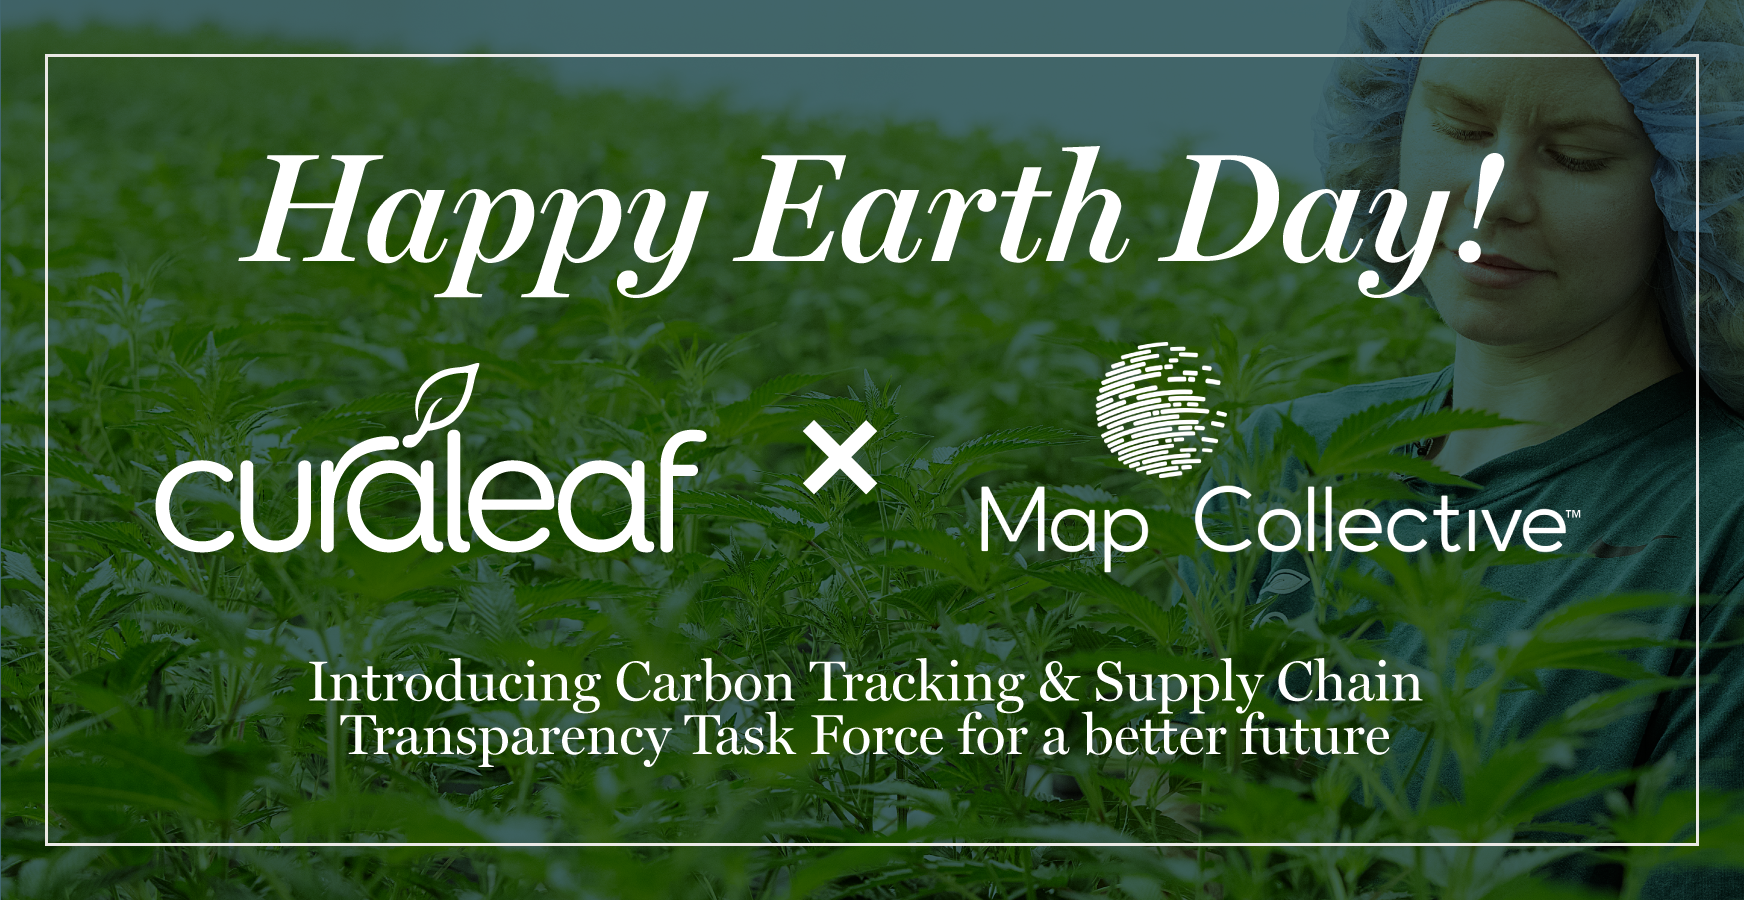 Earth Day Curaleaf and Map Collective Partnership Image